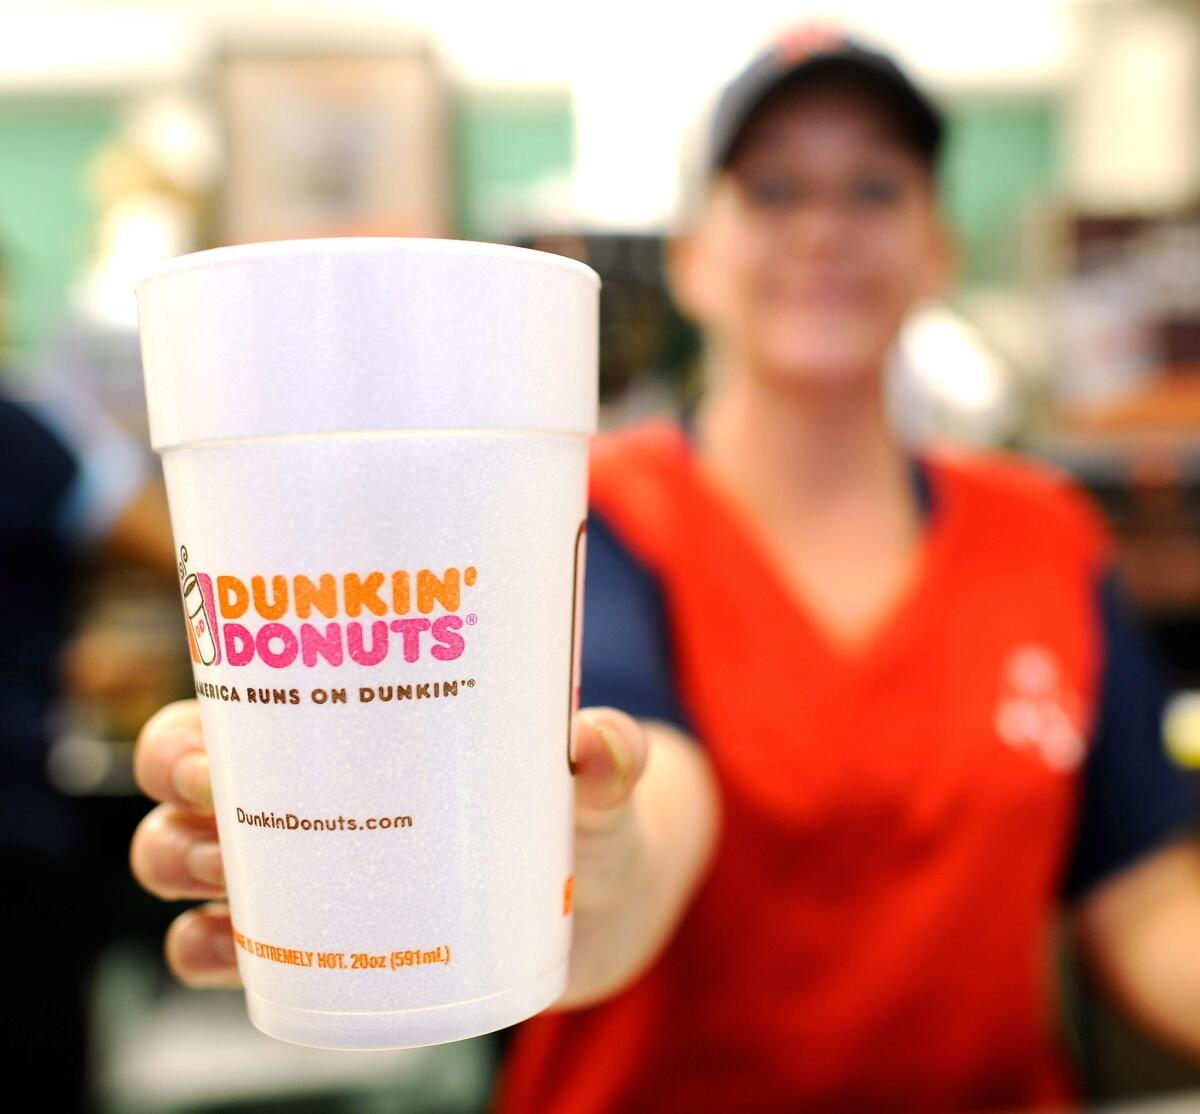 Dunkin' Donuts opened its first traditional store in the Southland in Santa Monica on Tuesday.